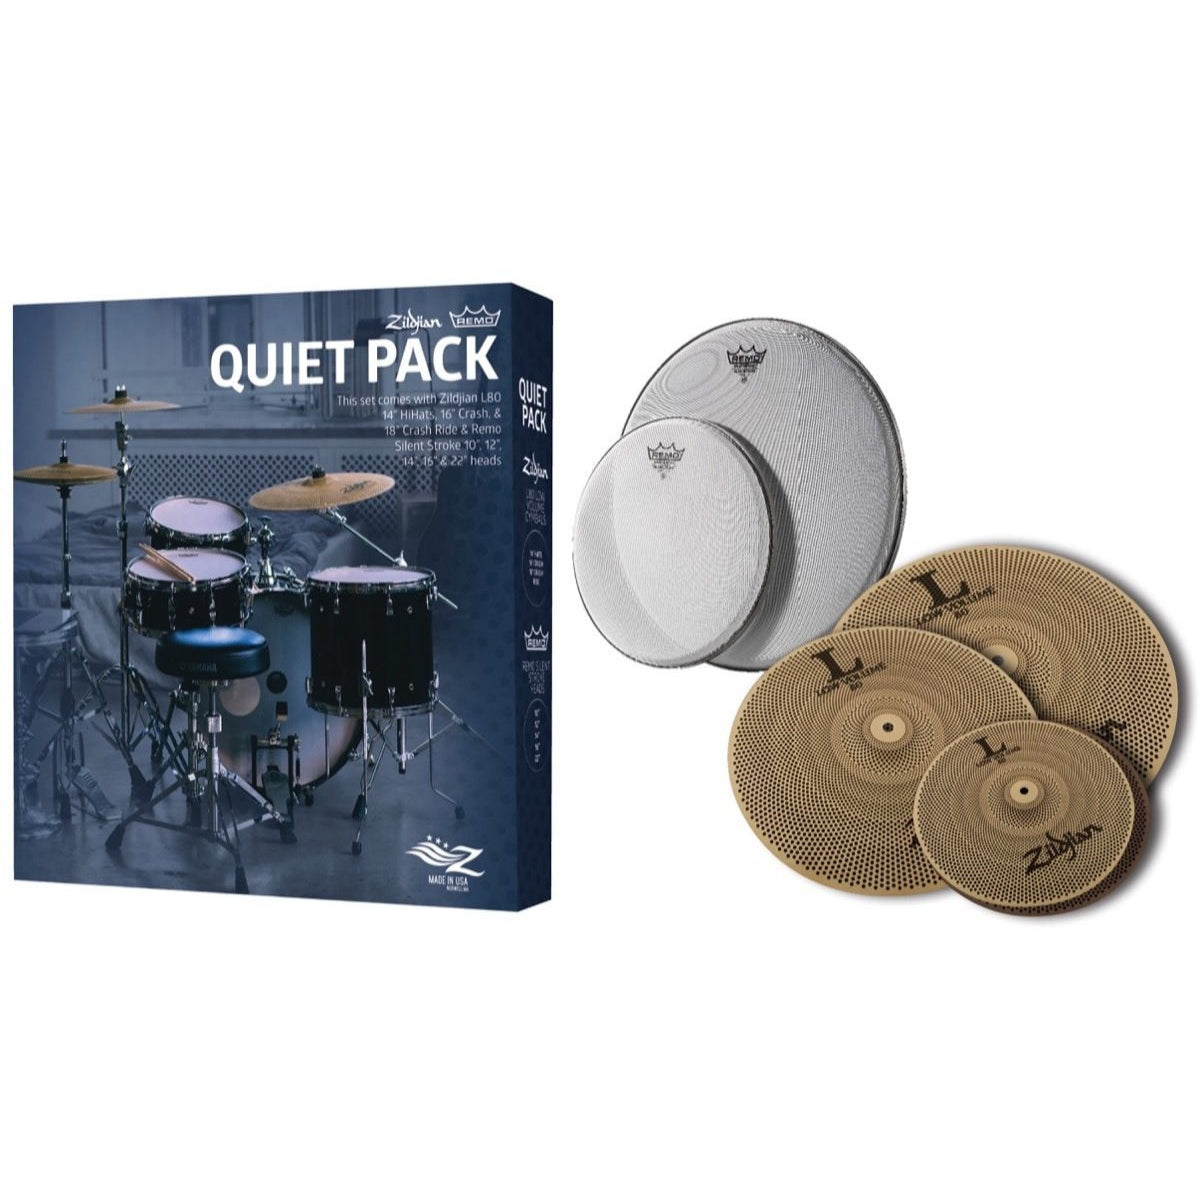 Zildjian L80 468 Low Volume Cymbal Pack, with Silent Stroke Remo Drum Heads